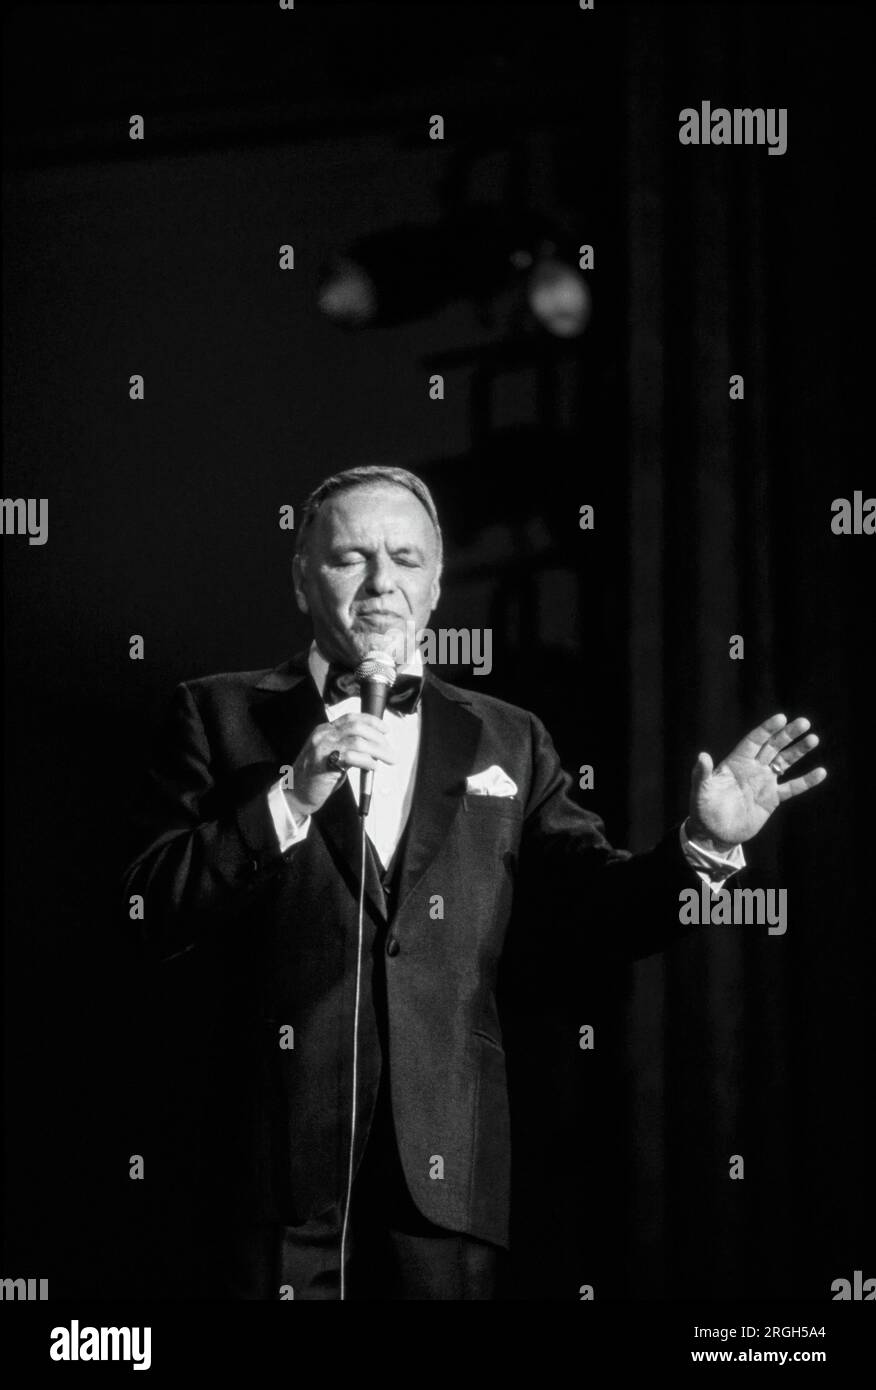 Frank Sinatra in performance, 1982. Photograph by Bernard Gotfryd . Francis Albert Sinatra was an American singer and actor. Nicknamed the 'Chairman of the Board' and later called 'Ol' Blue Eyes', he is regarded as one of the most popular entertainers of the mid-20th century. Sinatra is among the world's best-selling music artists with an estimated 150 million record sales.  Born to Italian immigrants in Hoboken, New Jersey, Sinatra began his musical career in the swing era . Stock Photo